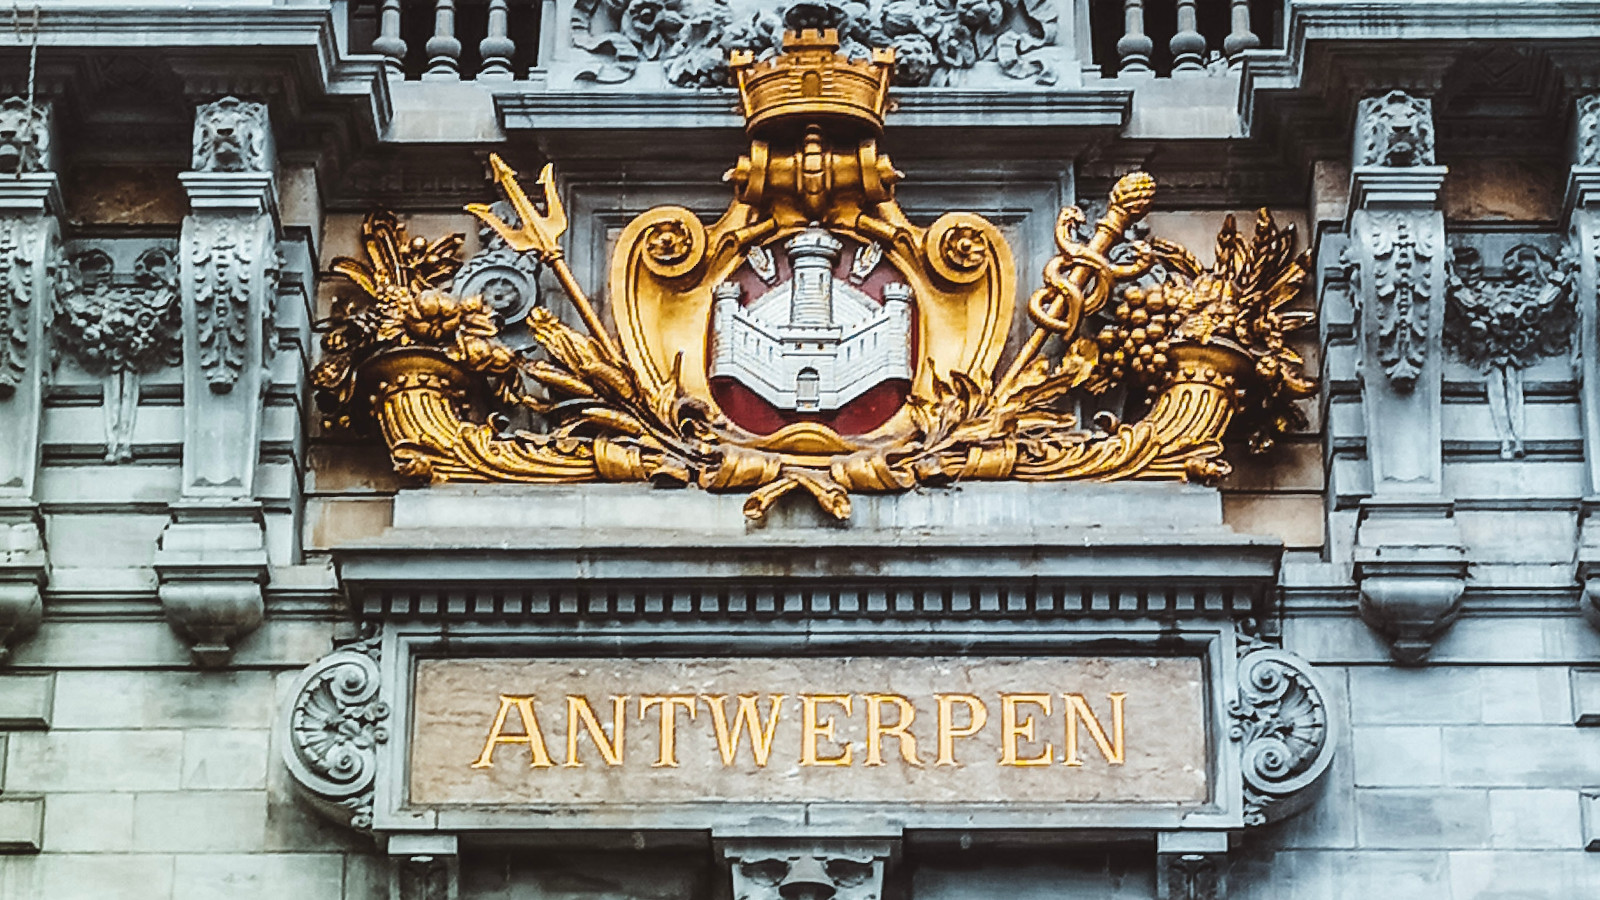 Antwerp's digital partner hacked, ransomware hits city services